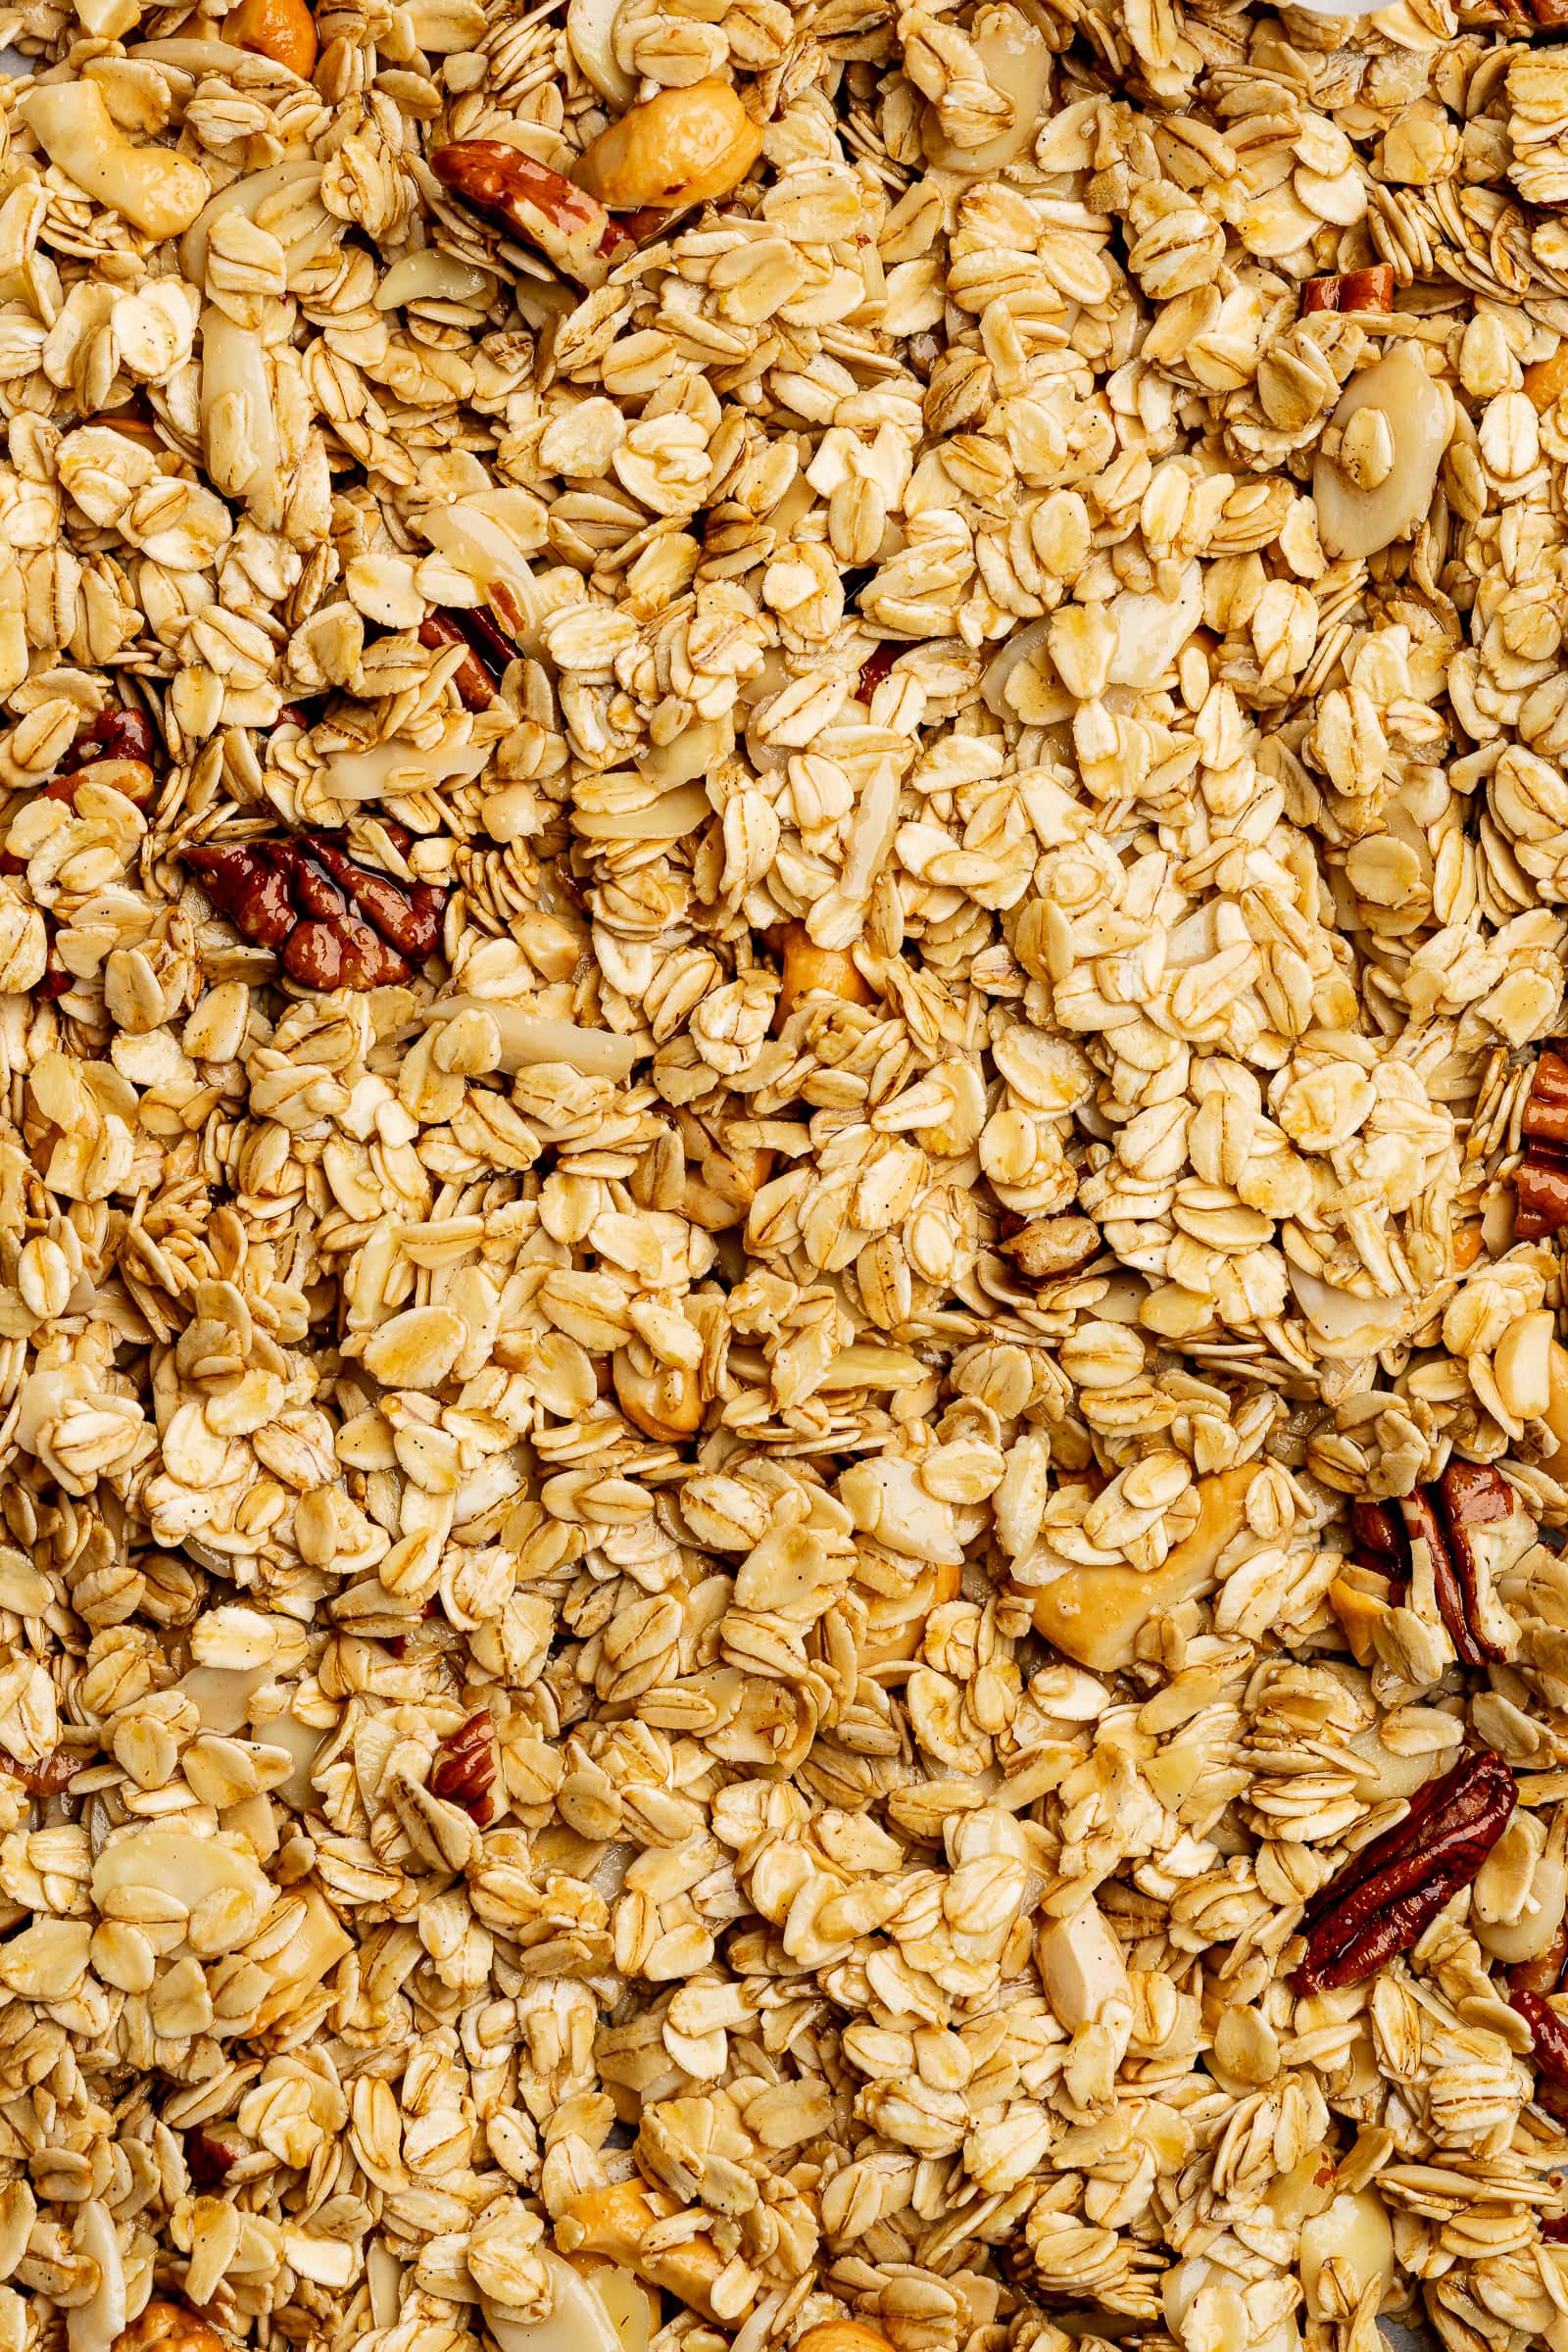 Granola spread out on to a baking sheet before baking.